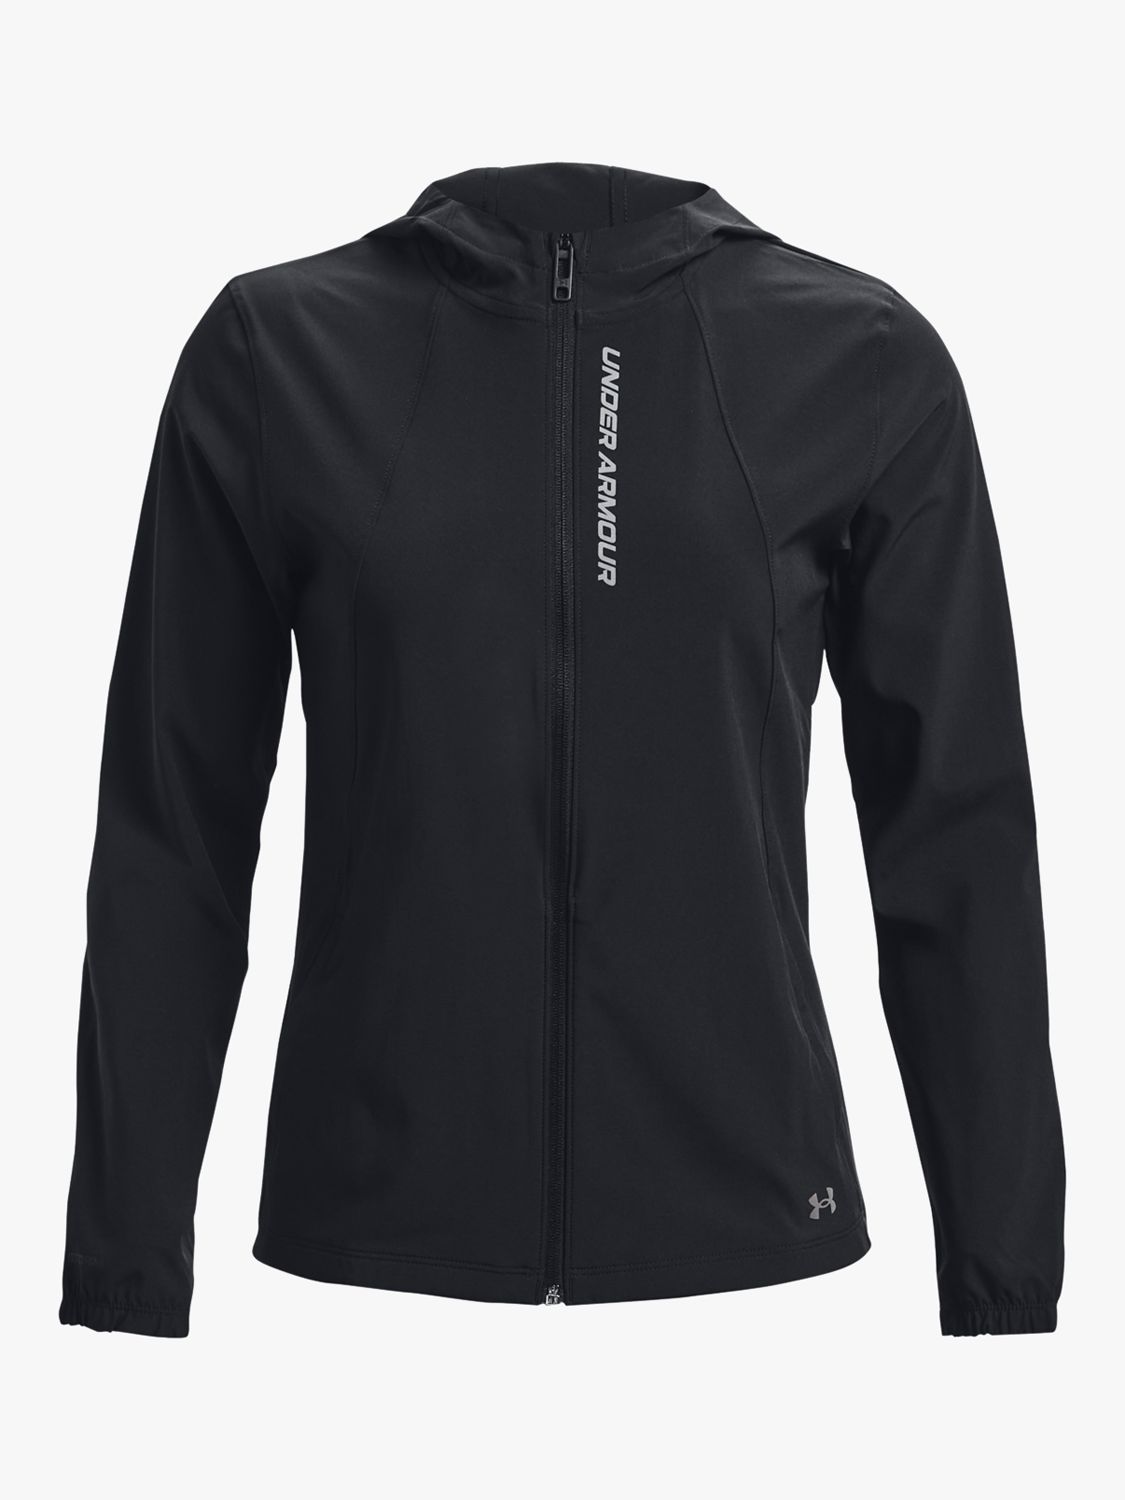 Under Armour OutRun The Storm Women's Running Jacket, Blk